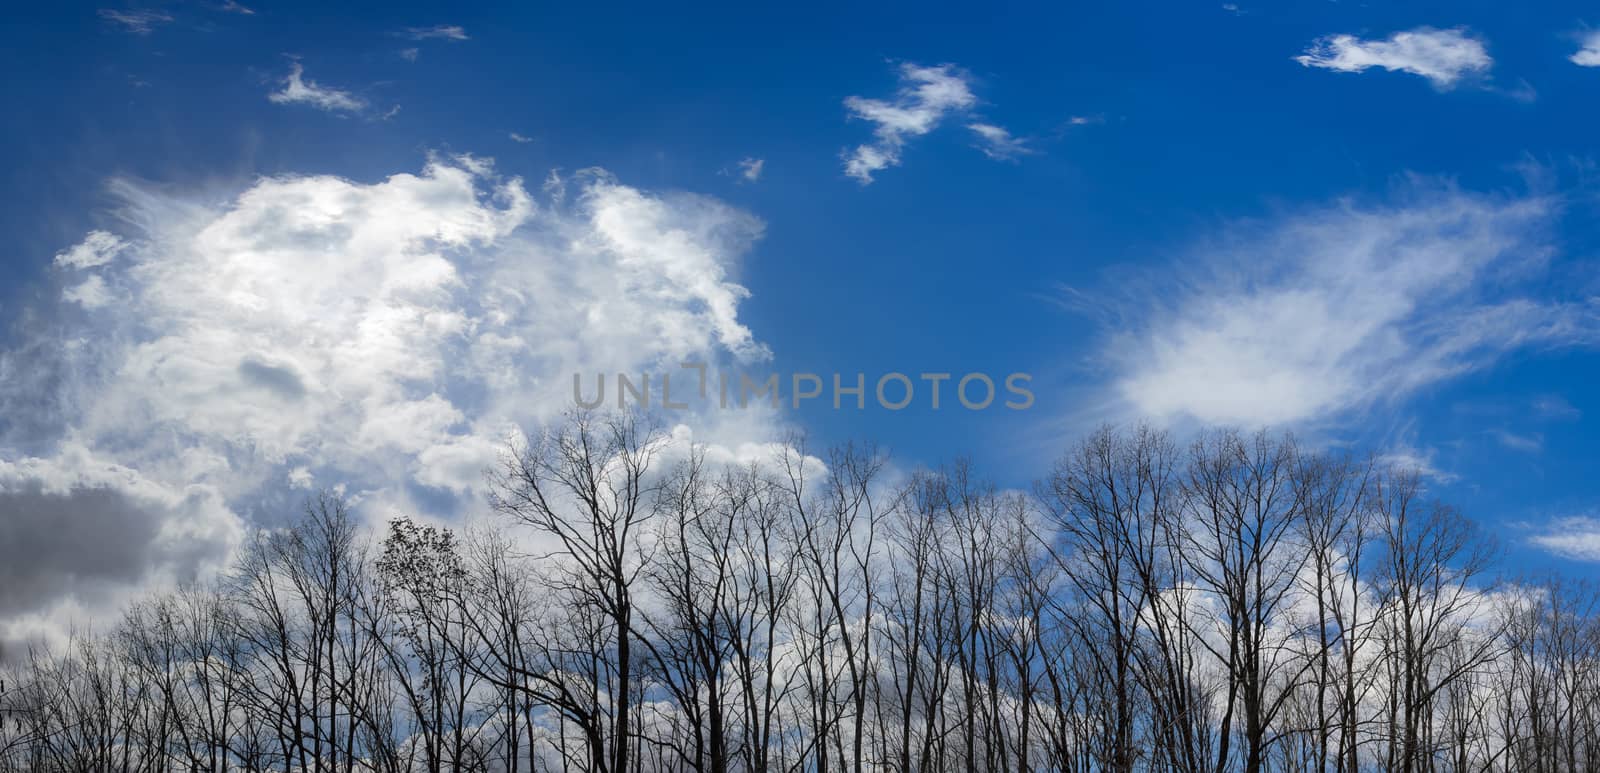 Sky with cirrus clouds and cumulus clouds with group of deciduous trees without a foliage in the foreground in early spring
